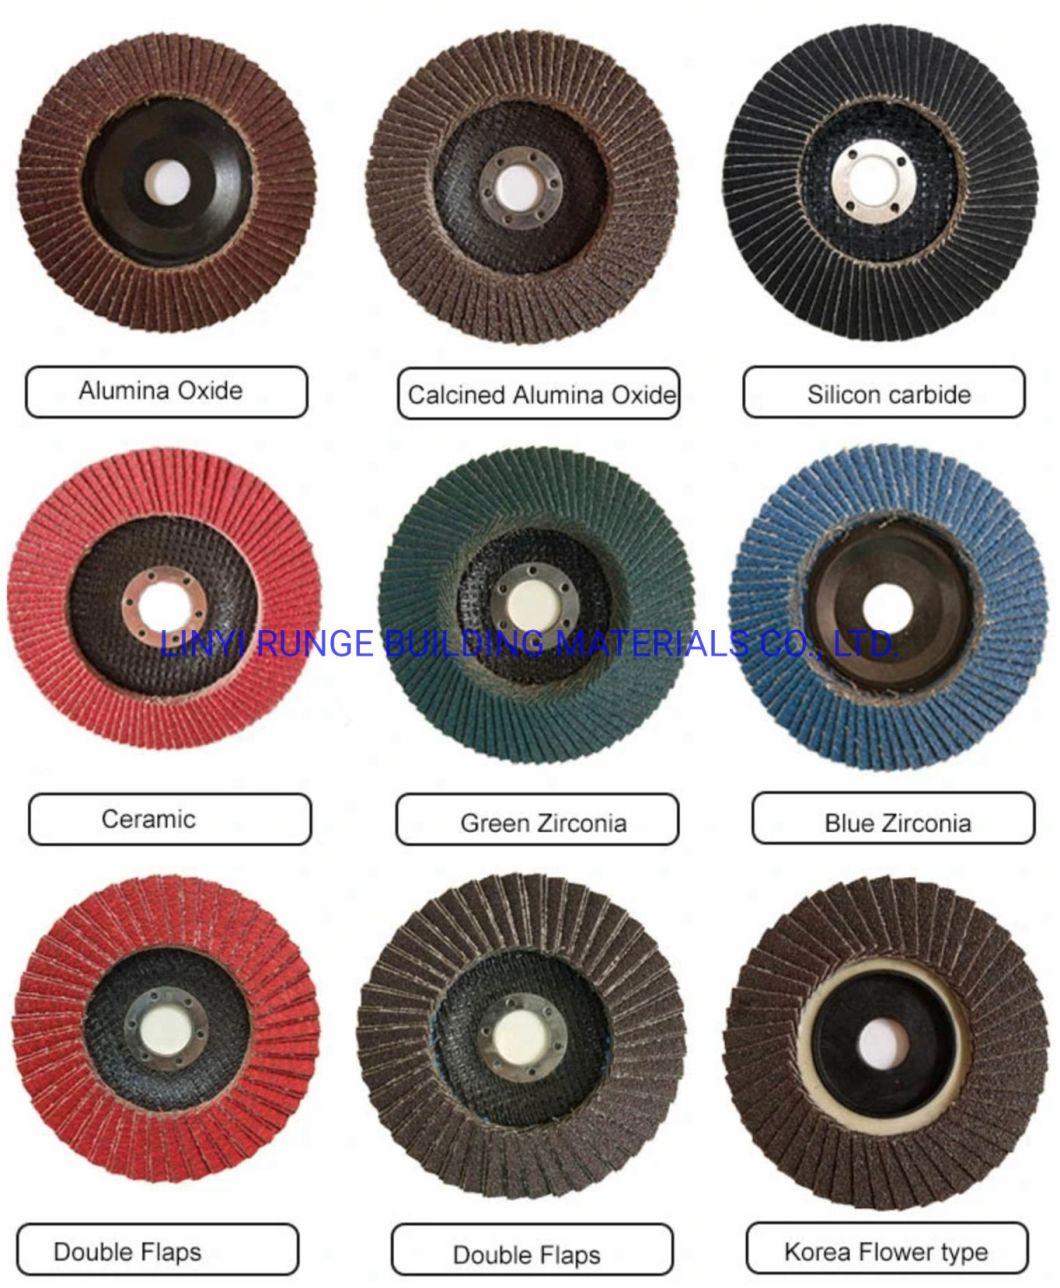 Power Tools 4-1/2-Inch Metal Stainless Steel Inox Grinding Discs for 4.5" Angle Grinder